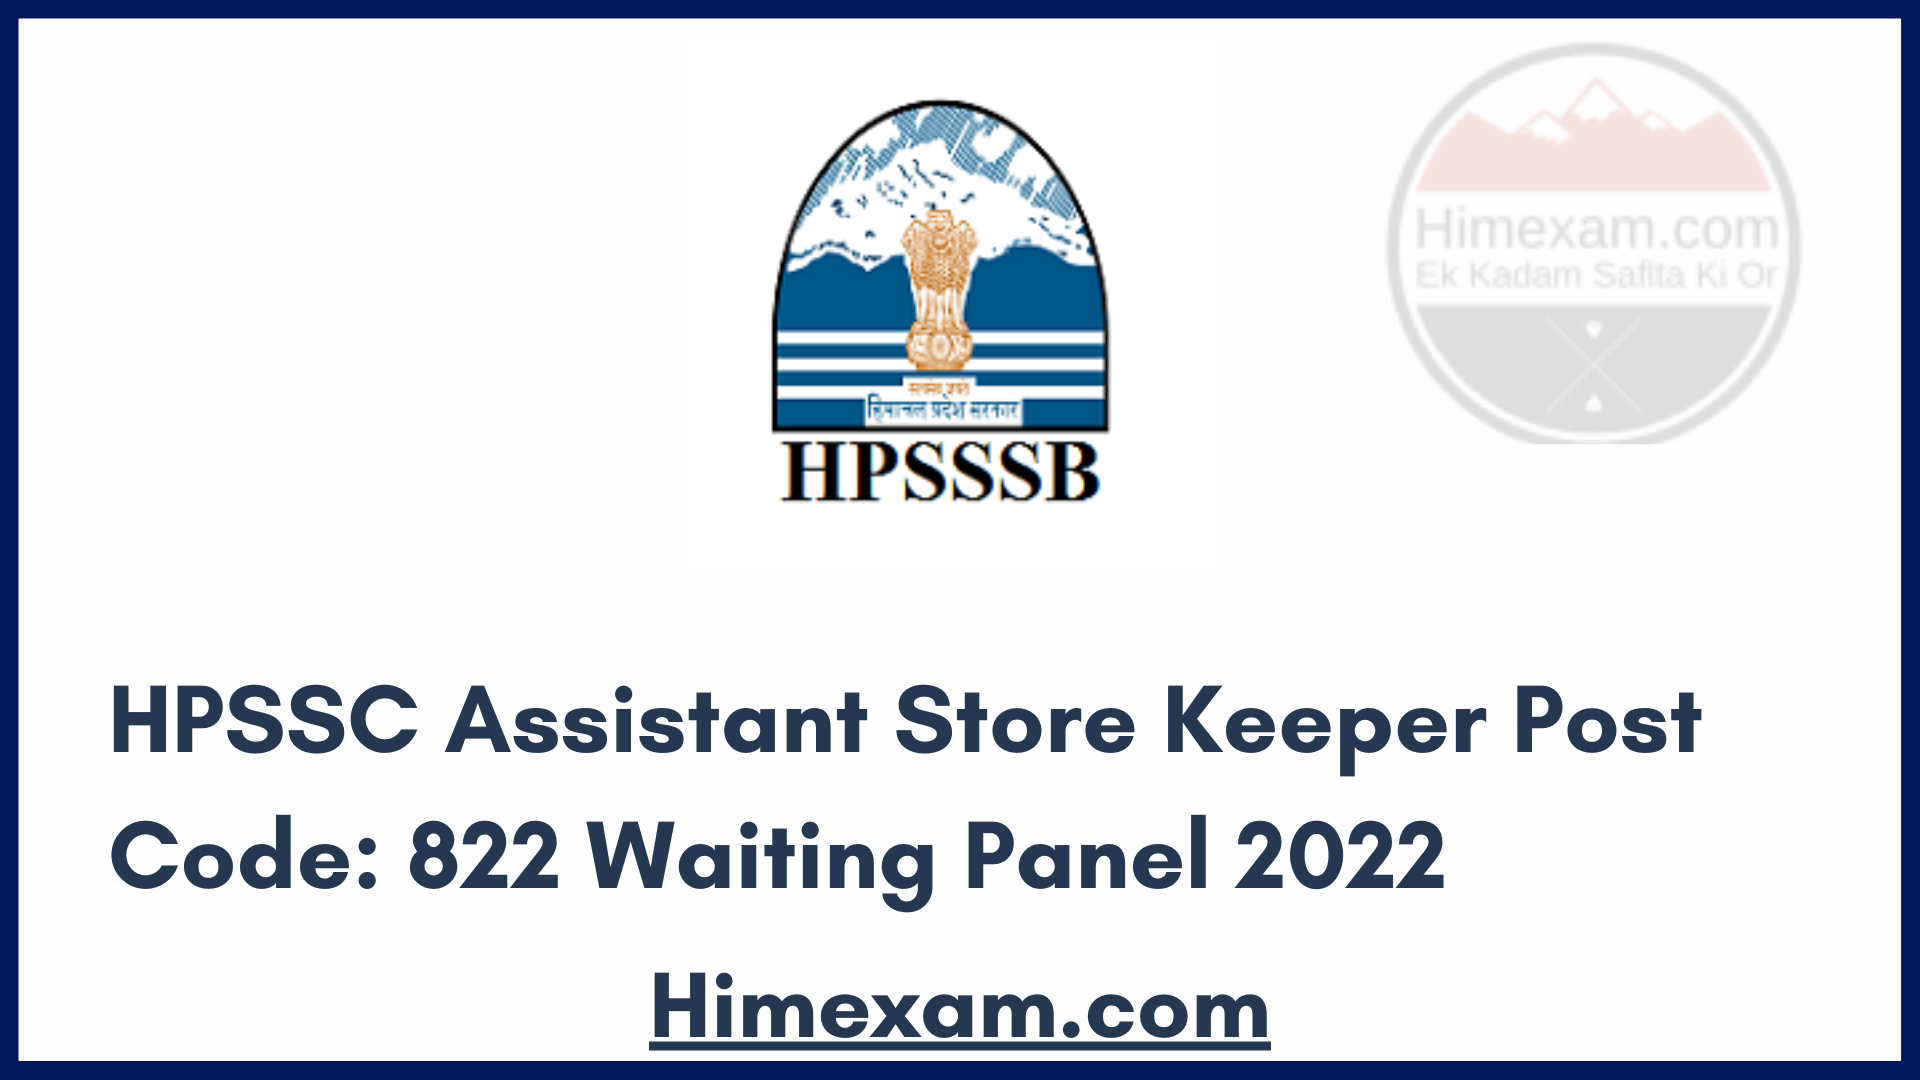 HPSSC Assistant Store Keeper Post Code: 822 Waiting Panel 2022